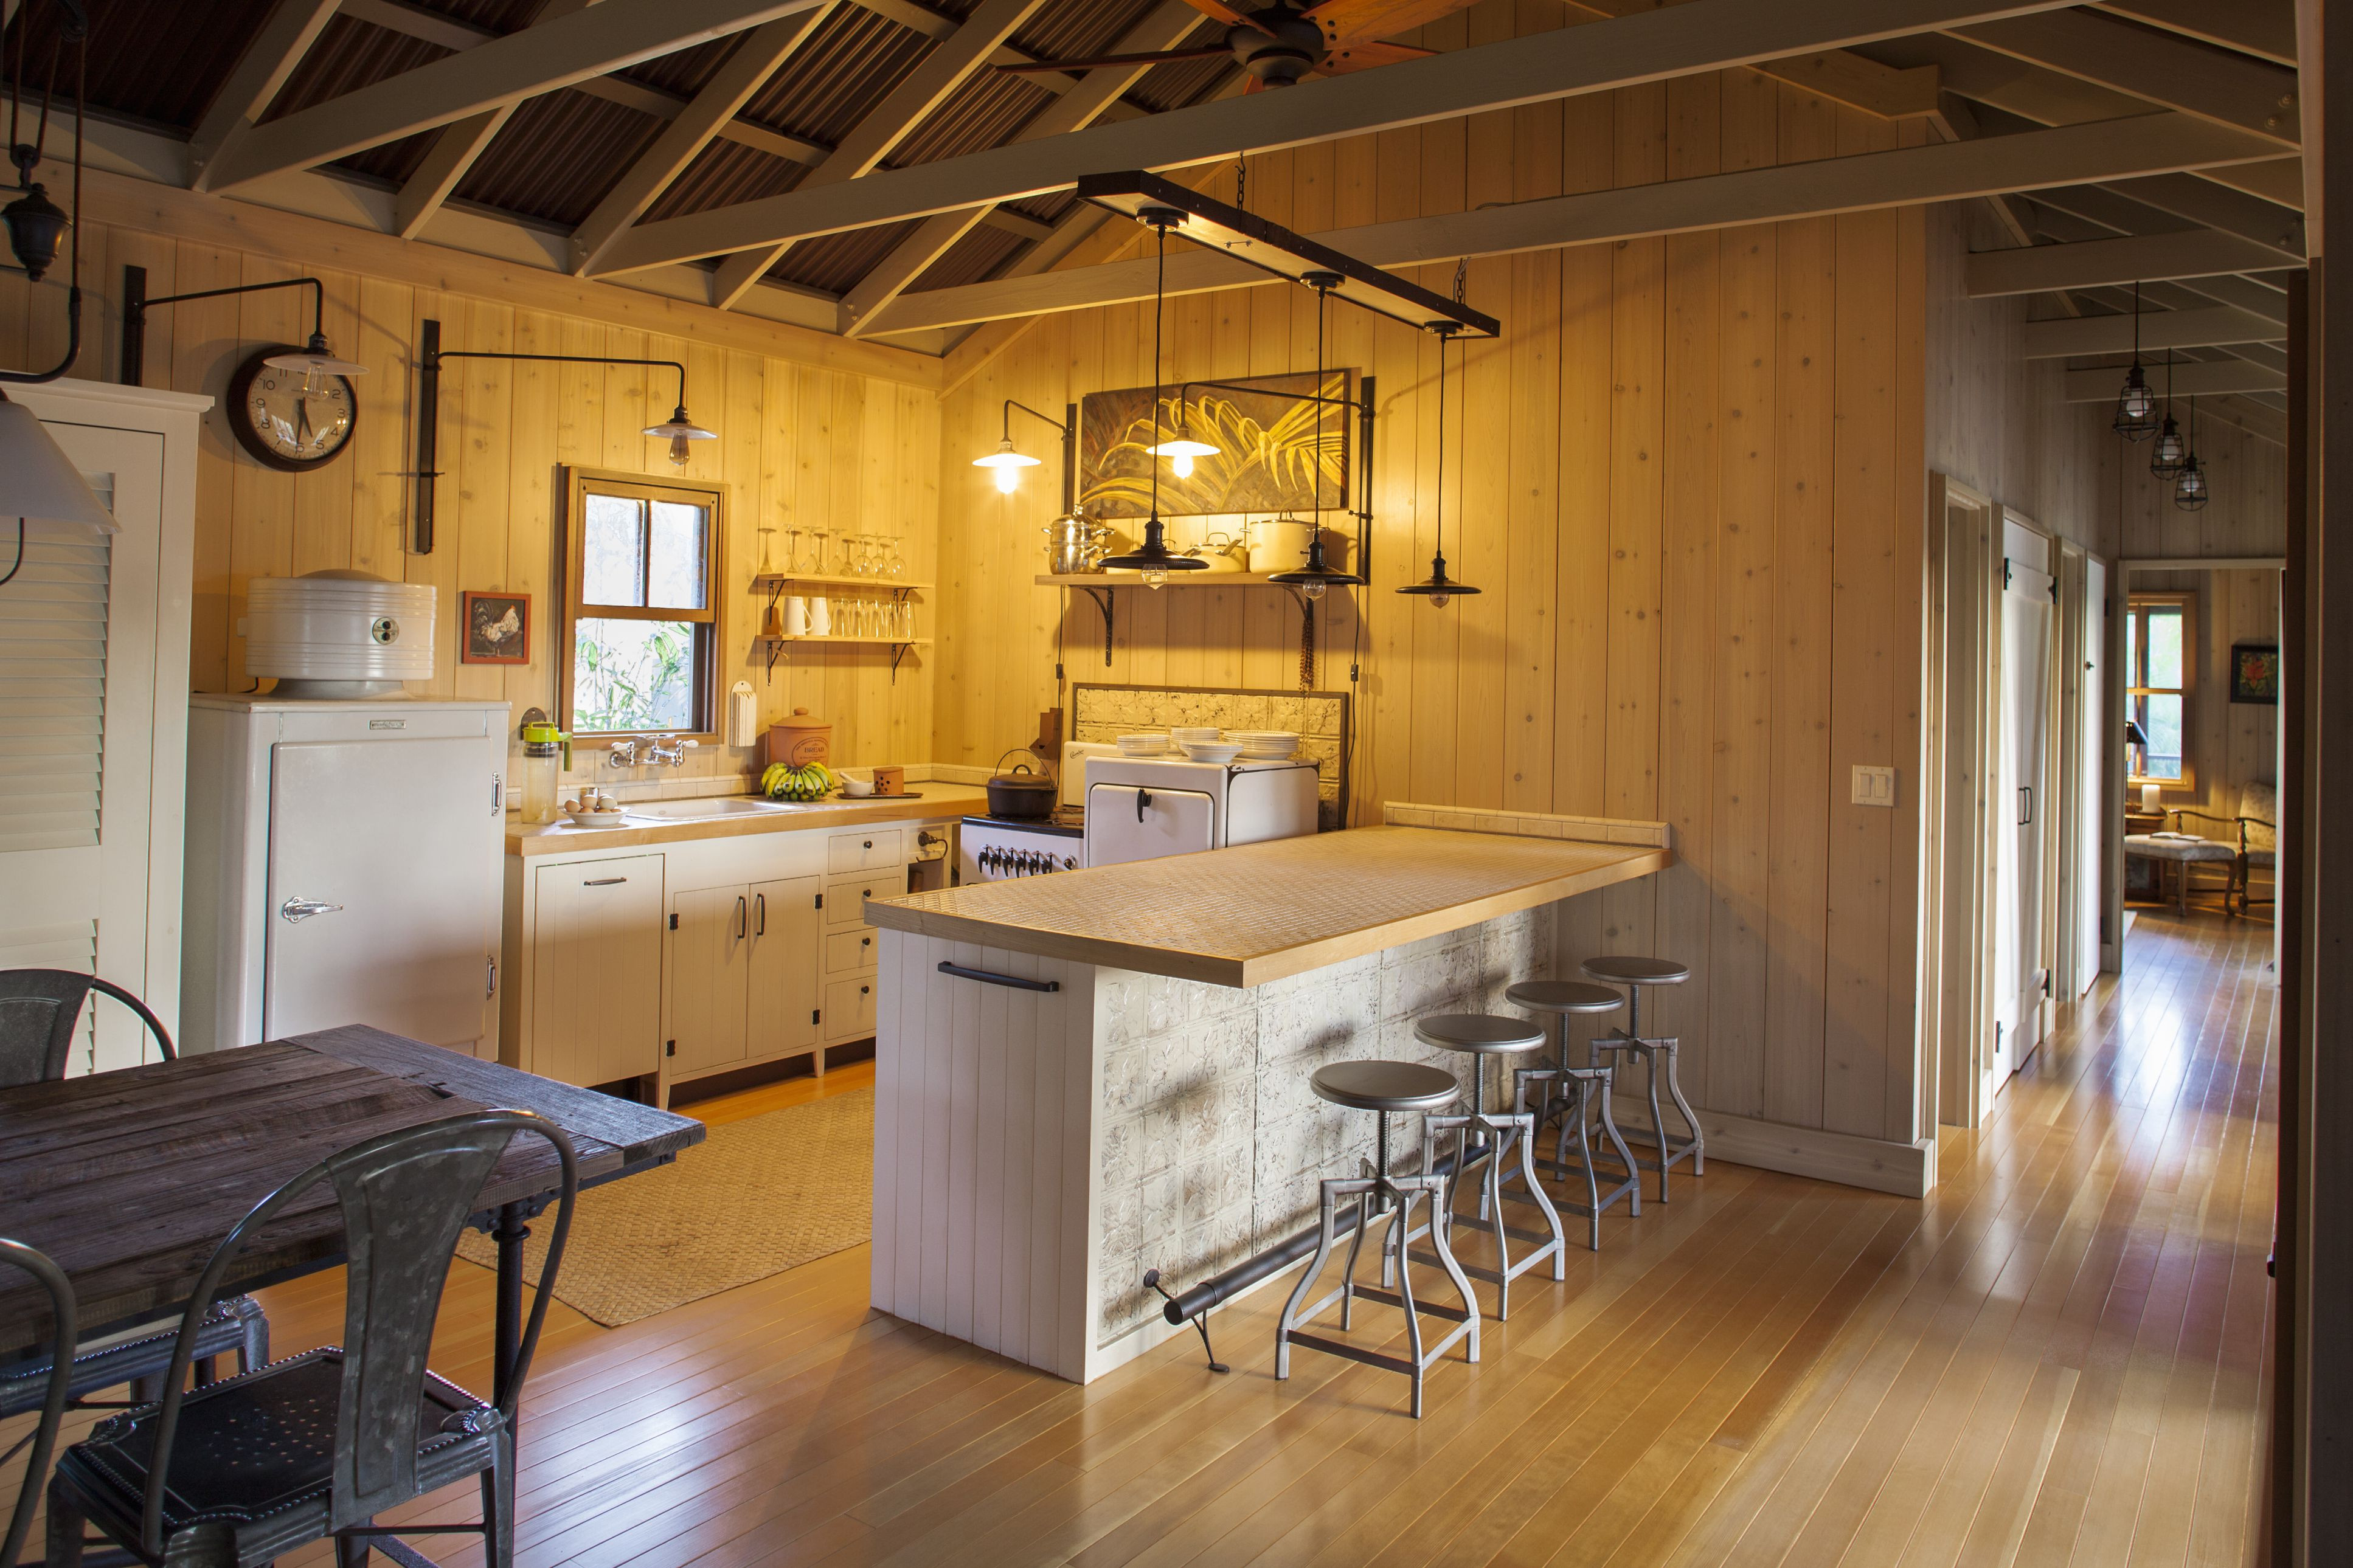 maine traditions hardwood flooring of country or rustic kitchen design ideas within kitchen wood floor and open beam ceiling 583805041 compassionate eye found 56a4a1663df78cf772835369